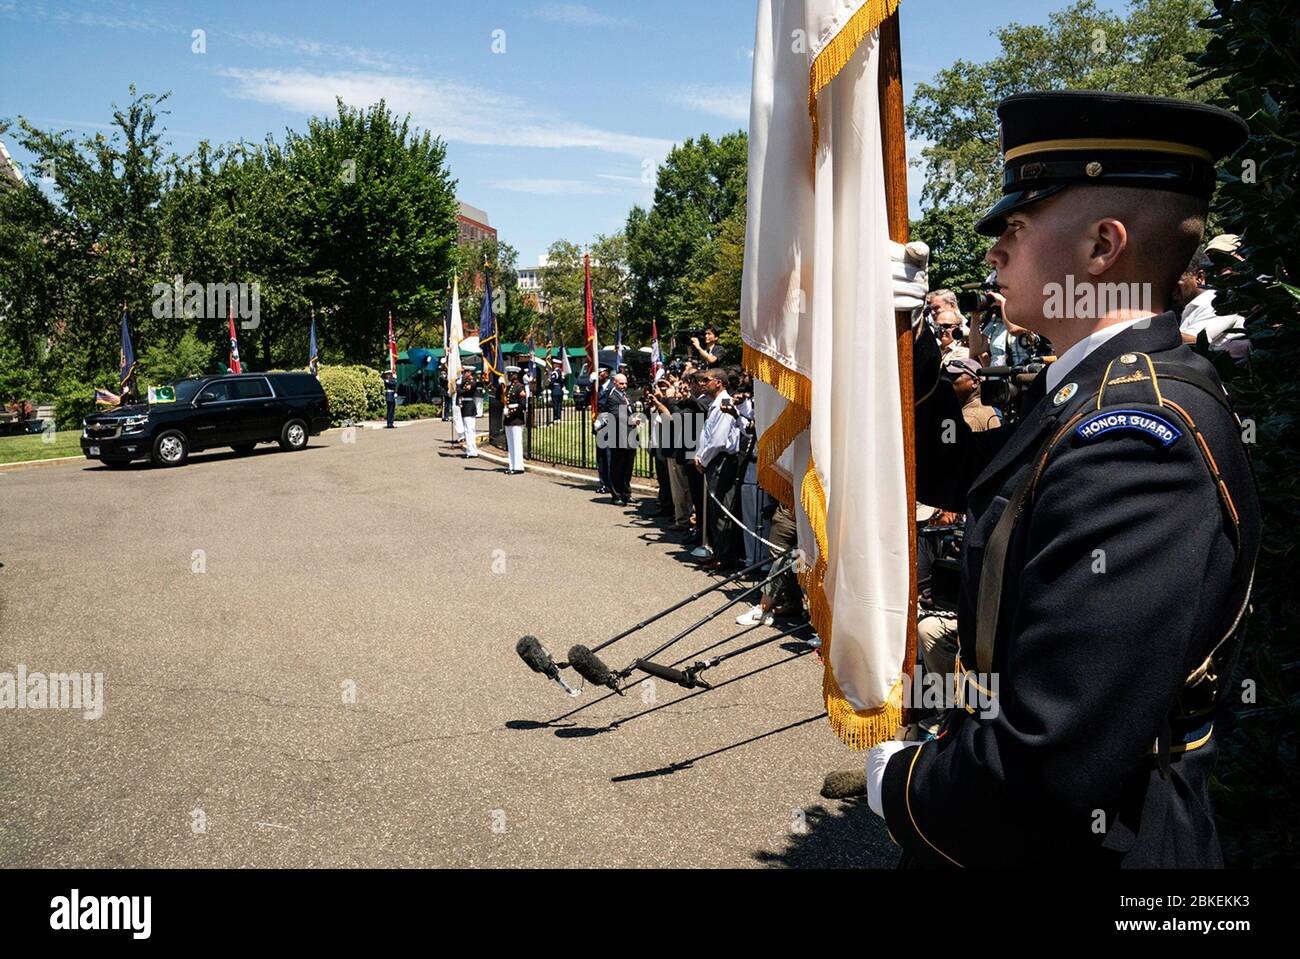 A military honor cordon welcomes the arrival of Prime Minister Imran Khan of the Islamic Republic of Pakistan on Monday, July 22, 2019, to the West Wing Lobby entrance of the White House. P20190722JB-0213 1 Stock Photo